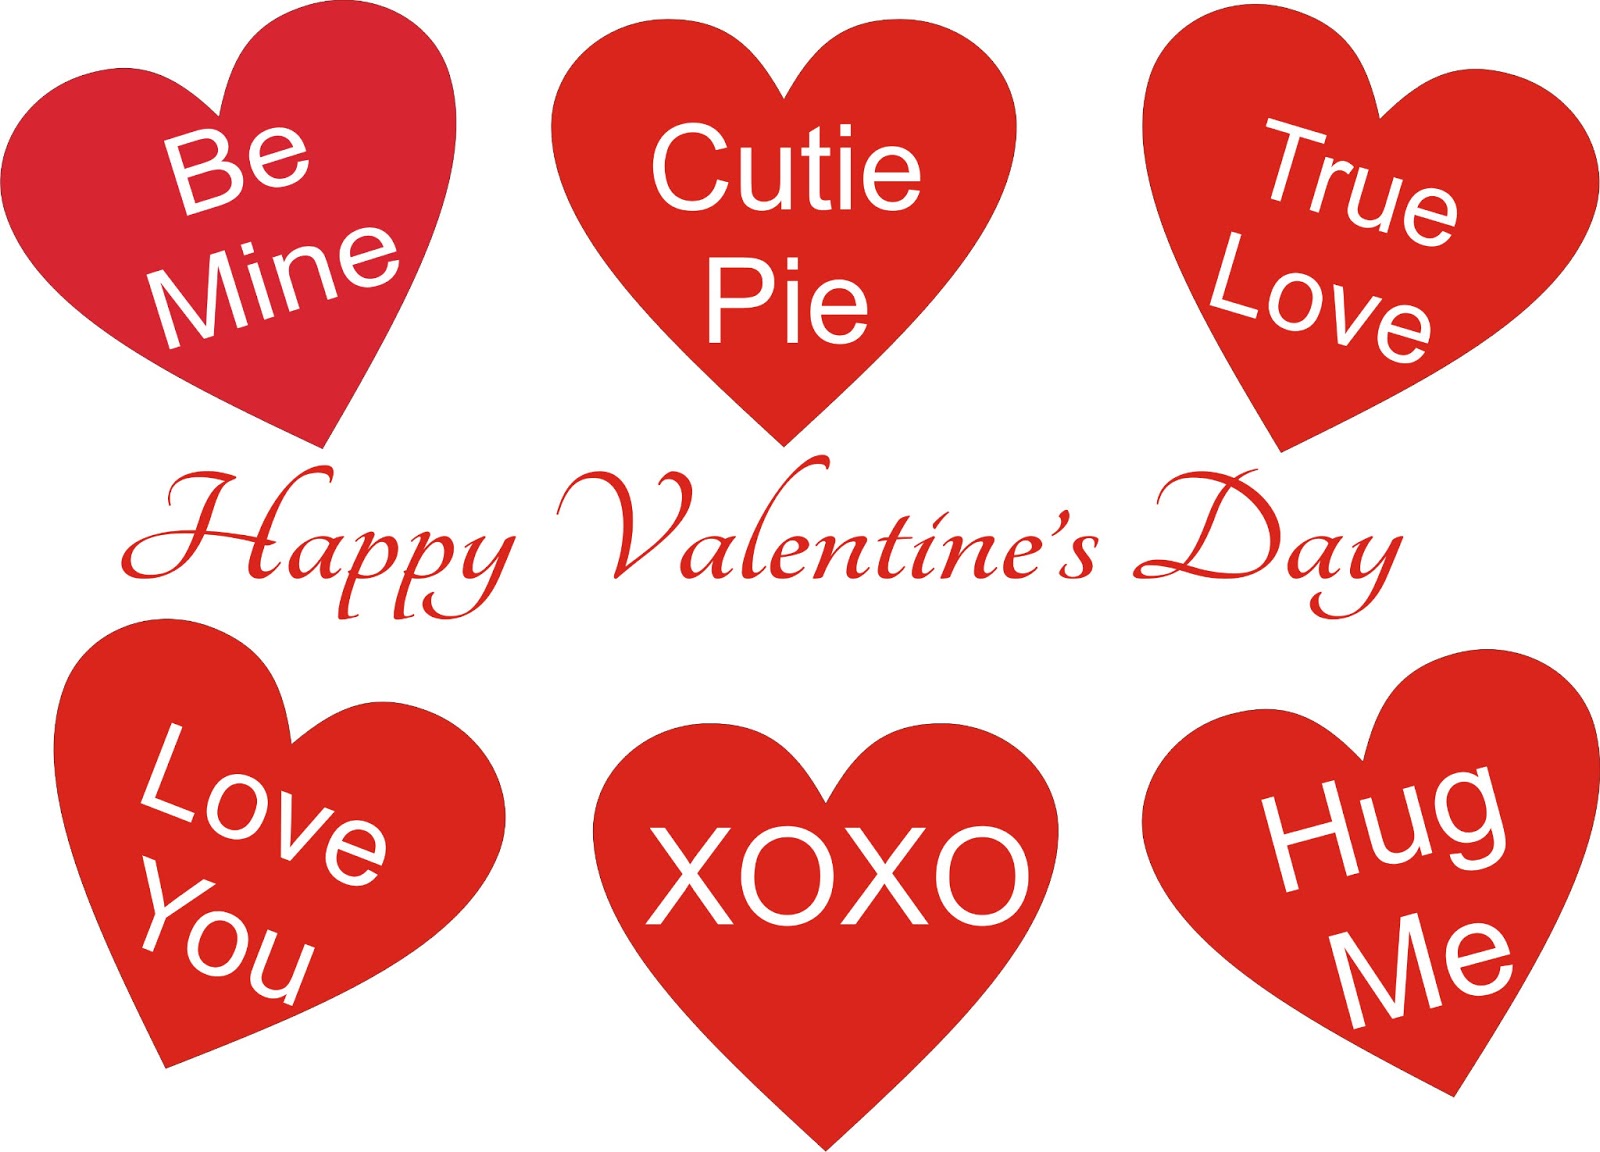 Clip Arts Related To : business happy valentines day. view all Happy Valent...